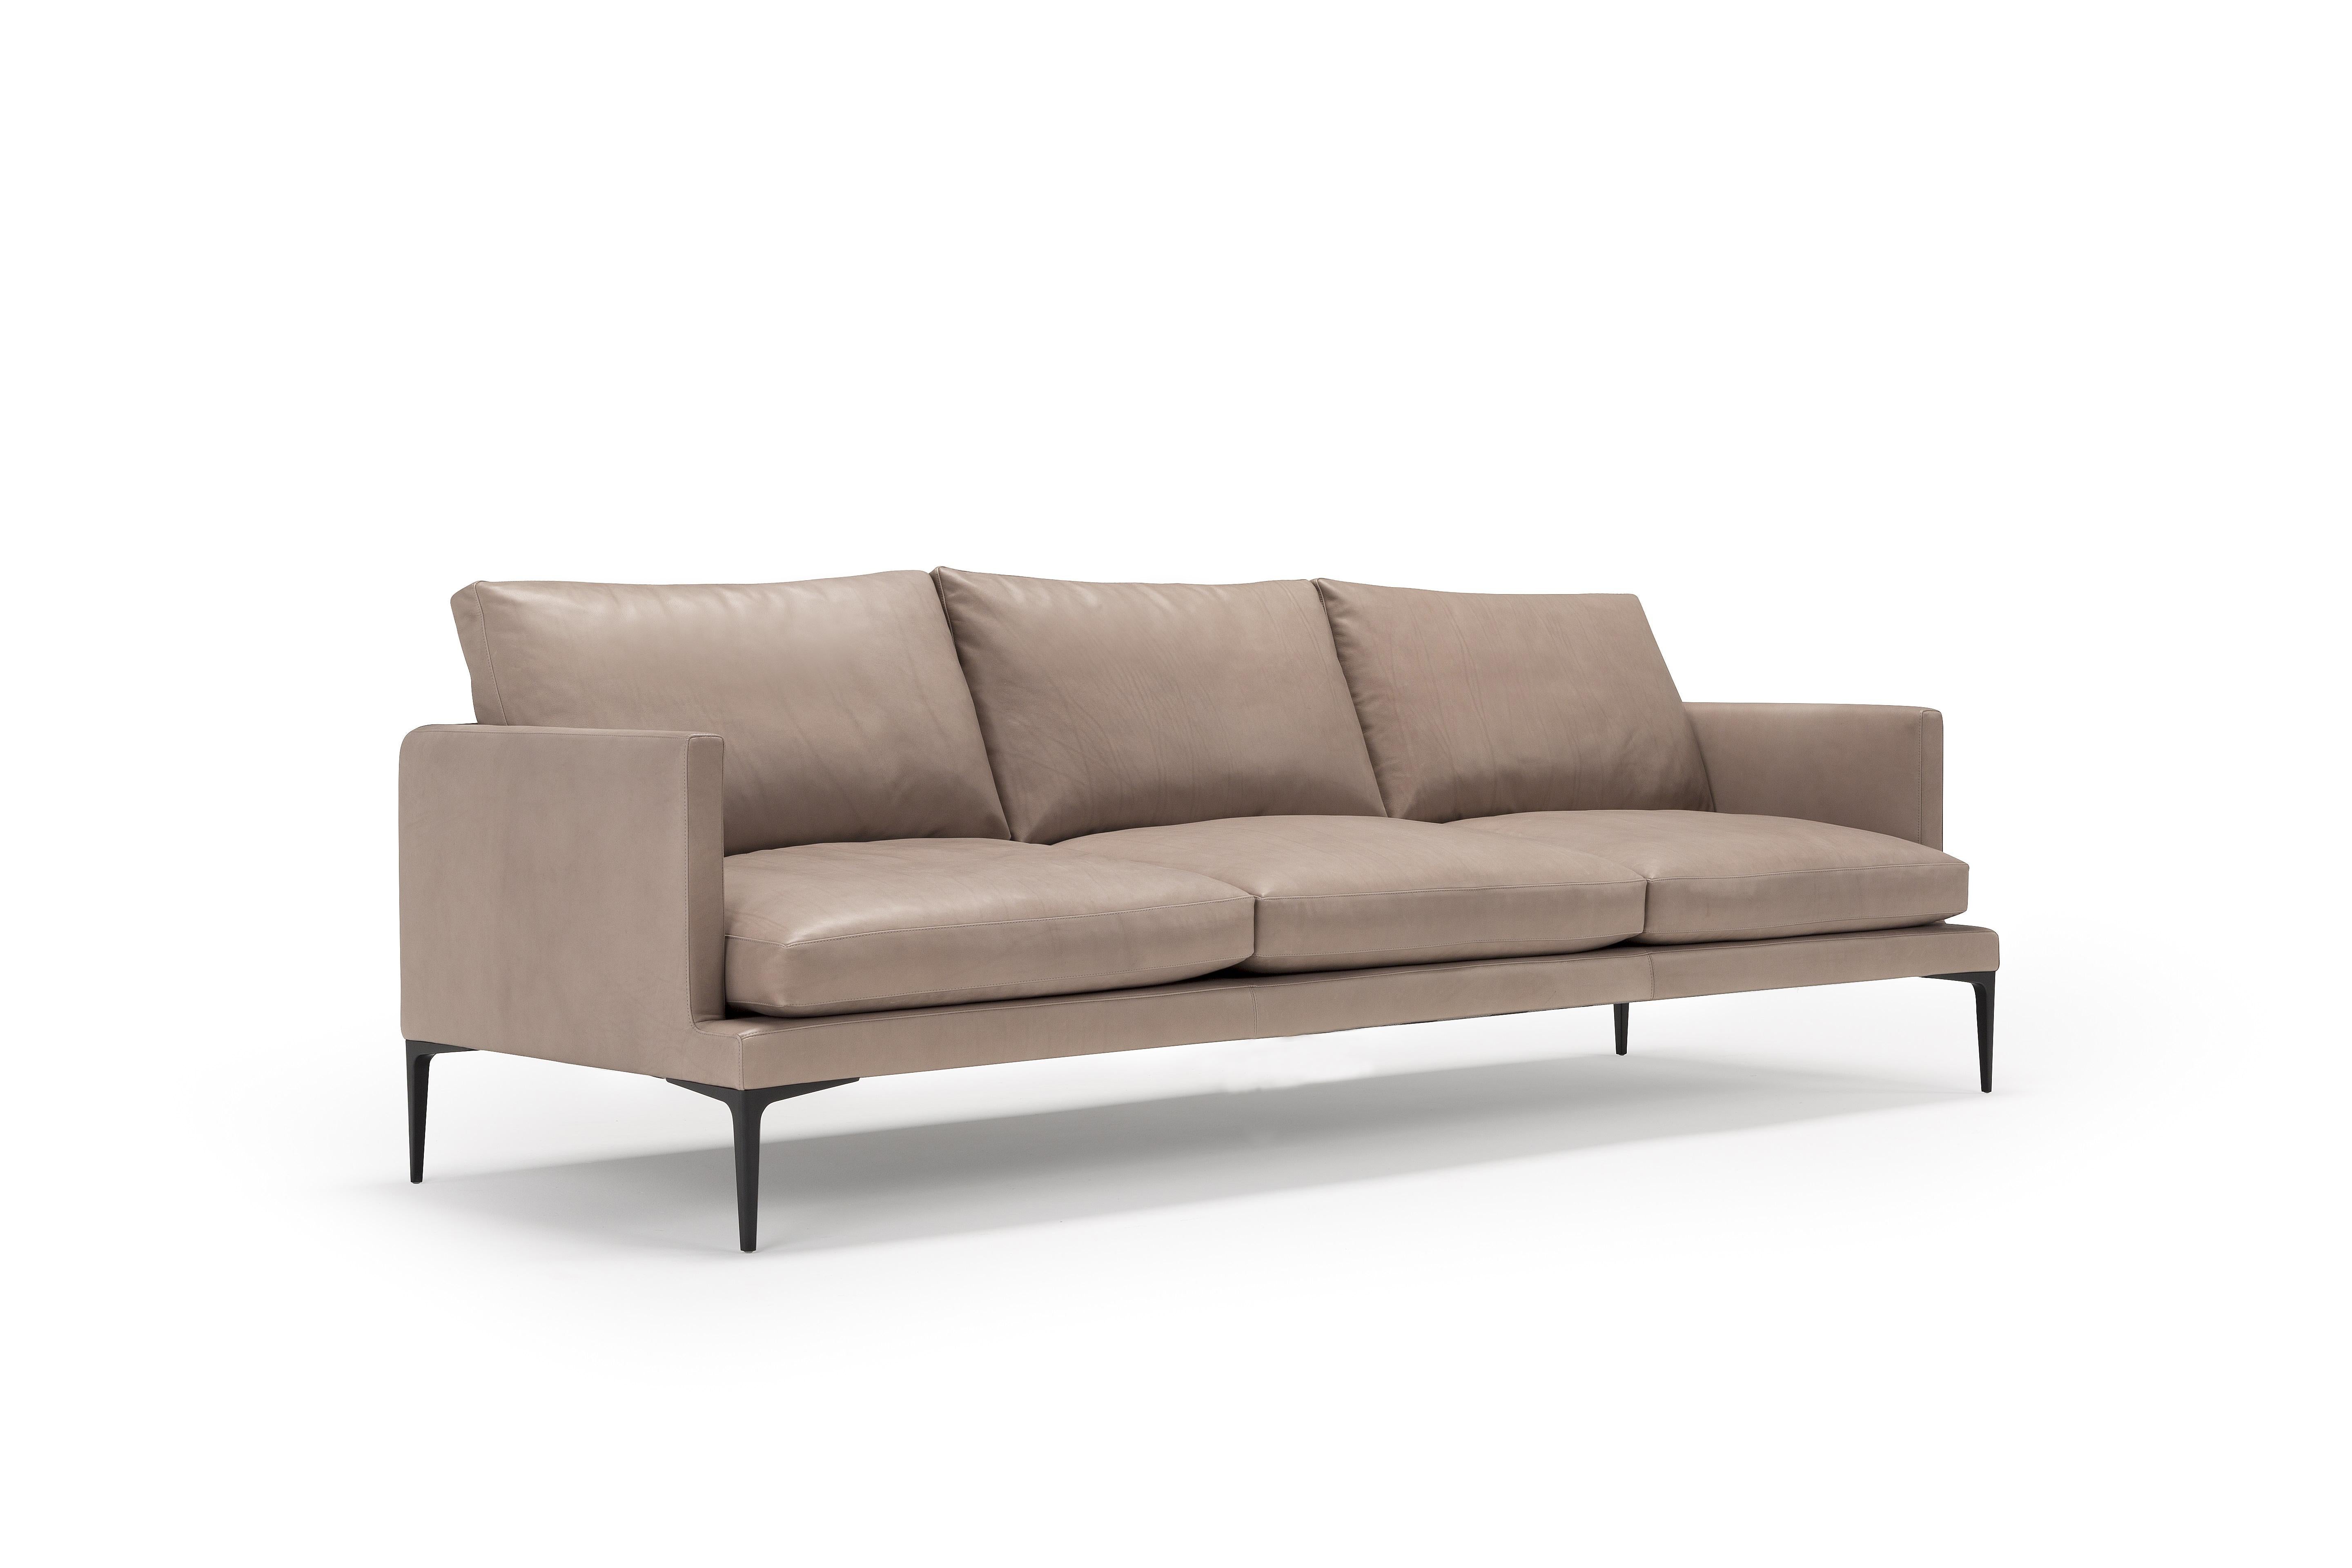 The Segno sofa has clean and safe lines with a welcoming and comfortable shape. It is rigorous in its lines that alternate angles and curves, to improve the sense of softness and forward the sense of comfort. Greater impact is given by the metal